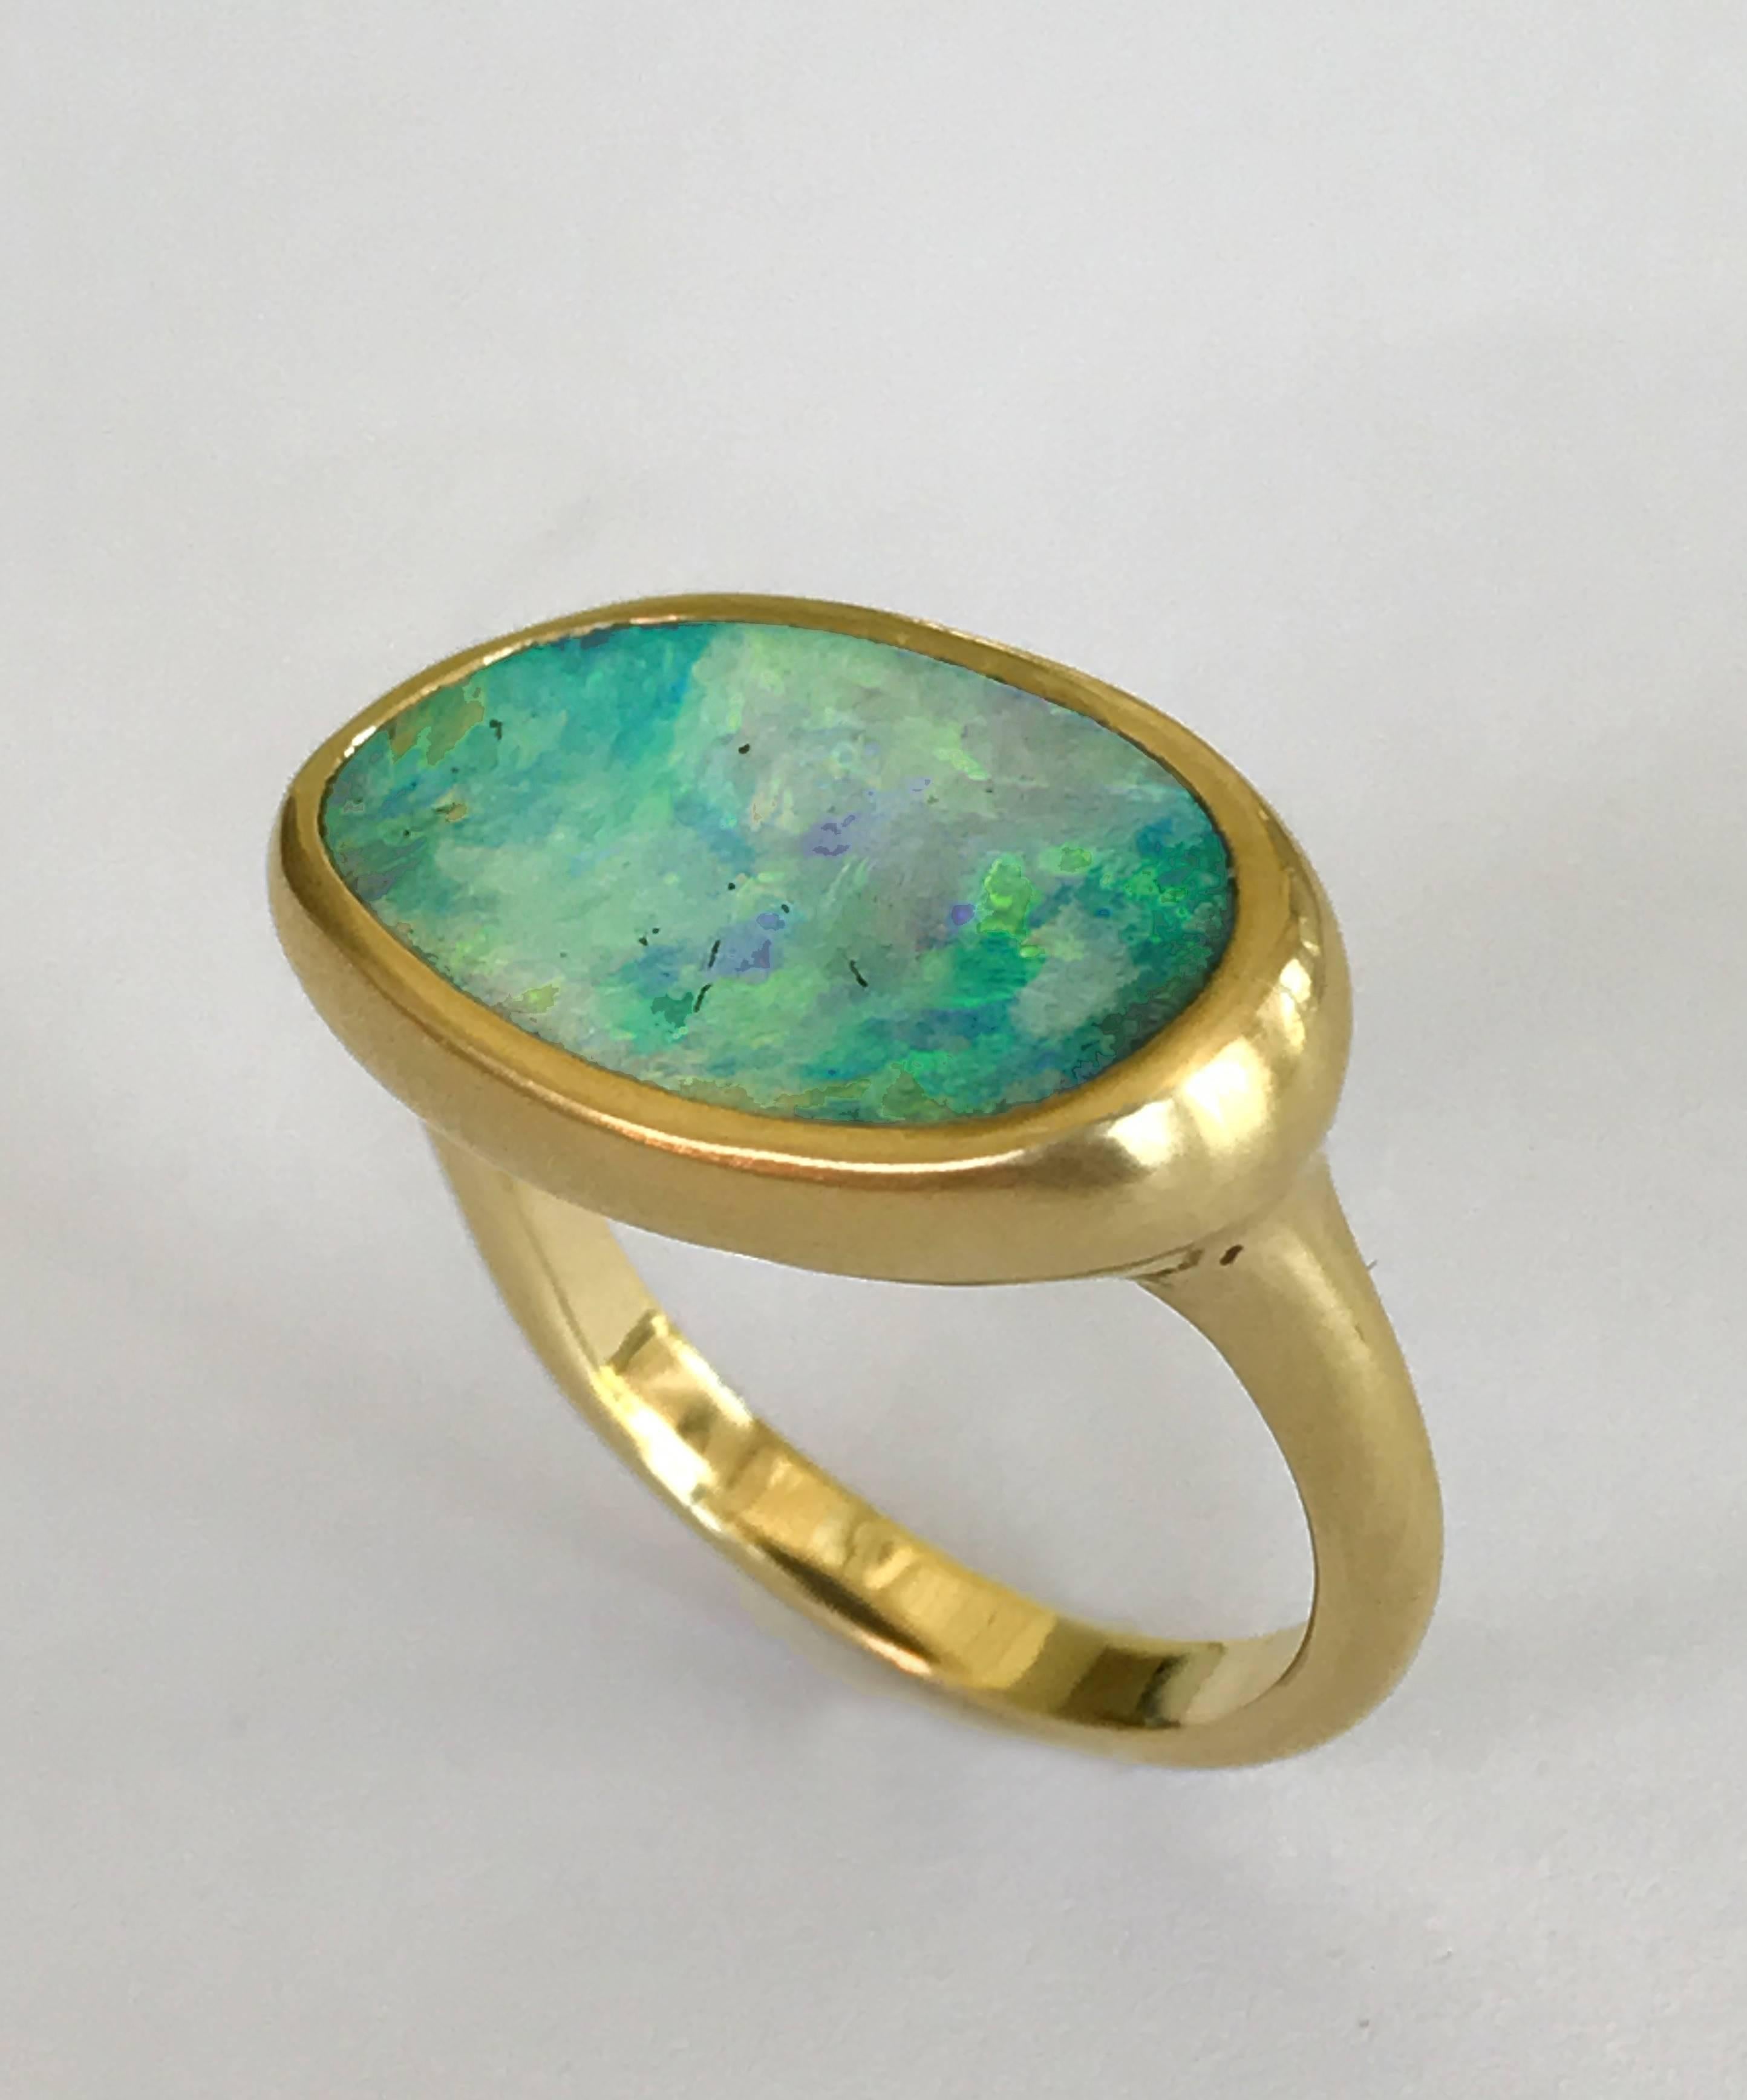 Dalben design One of a kind 18k yellow gold matte finishing ring with a 5,44 carat bezel-set lovely Australian Boulder Opal. 
The stone colors looks like a Sardinia bay sea . 
Ring size 6 3/4 - EU 54 re-sizable to most finger sizes. 
Bezel setting